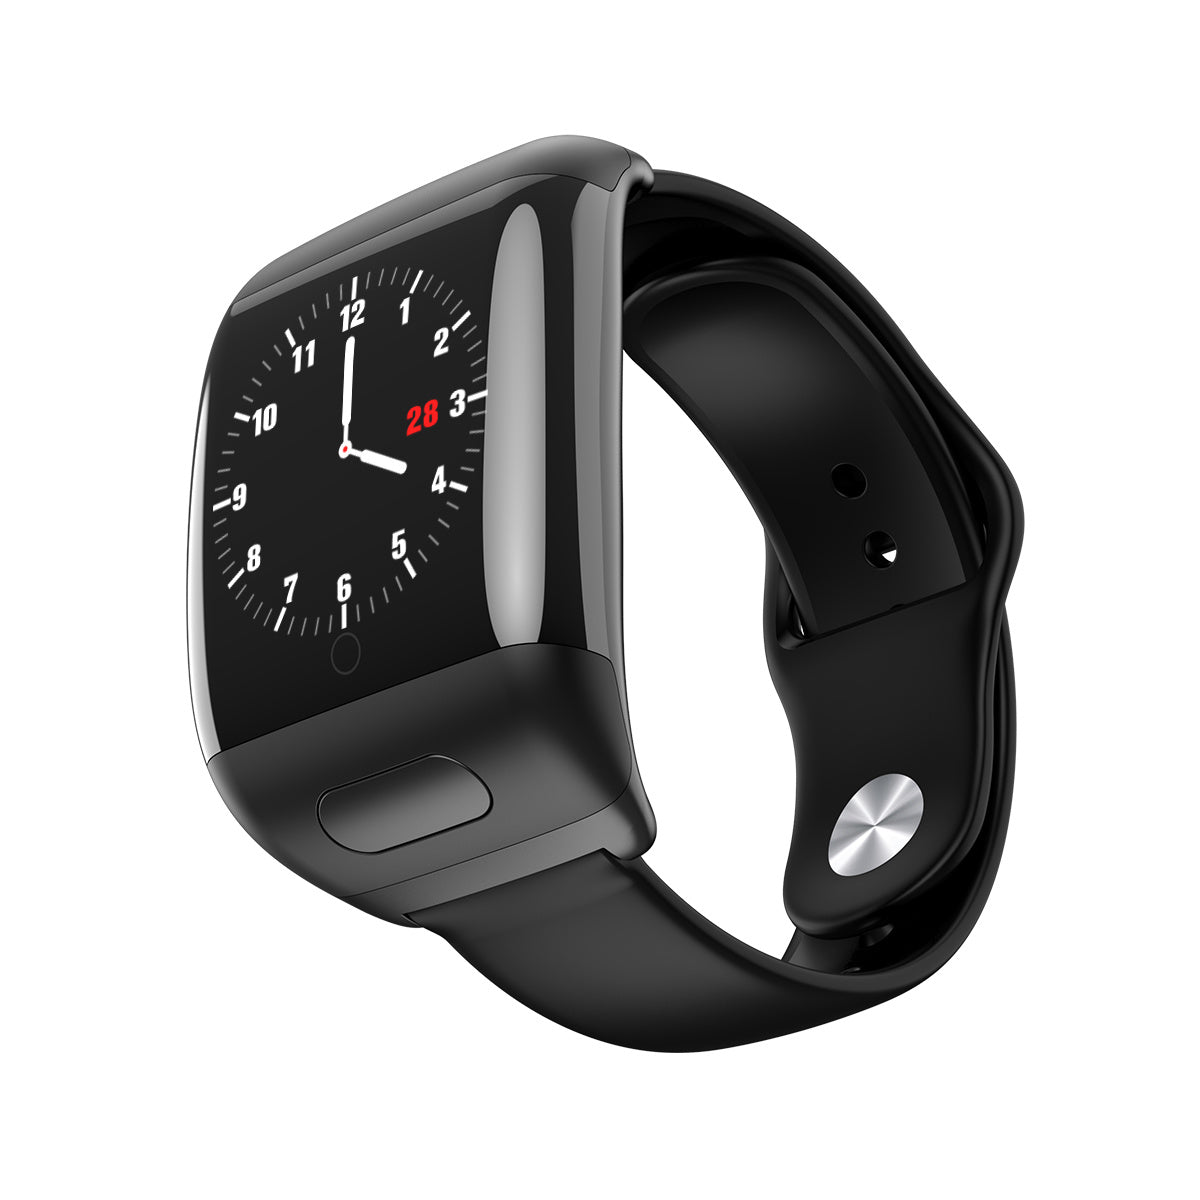 Smart Bluetooth headset two-in-one watch TWS Bluetooth headset smart call bracelet music control, heart rate, multi-sports mode